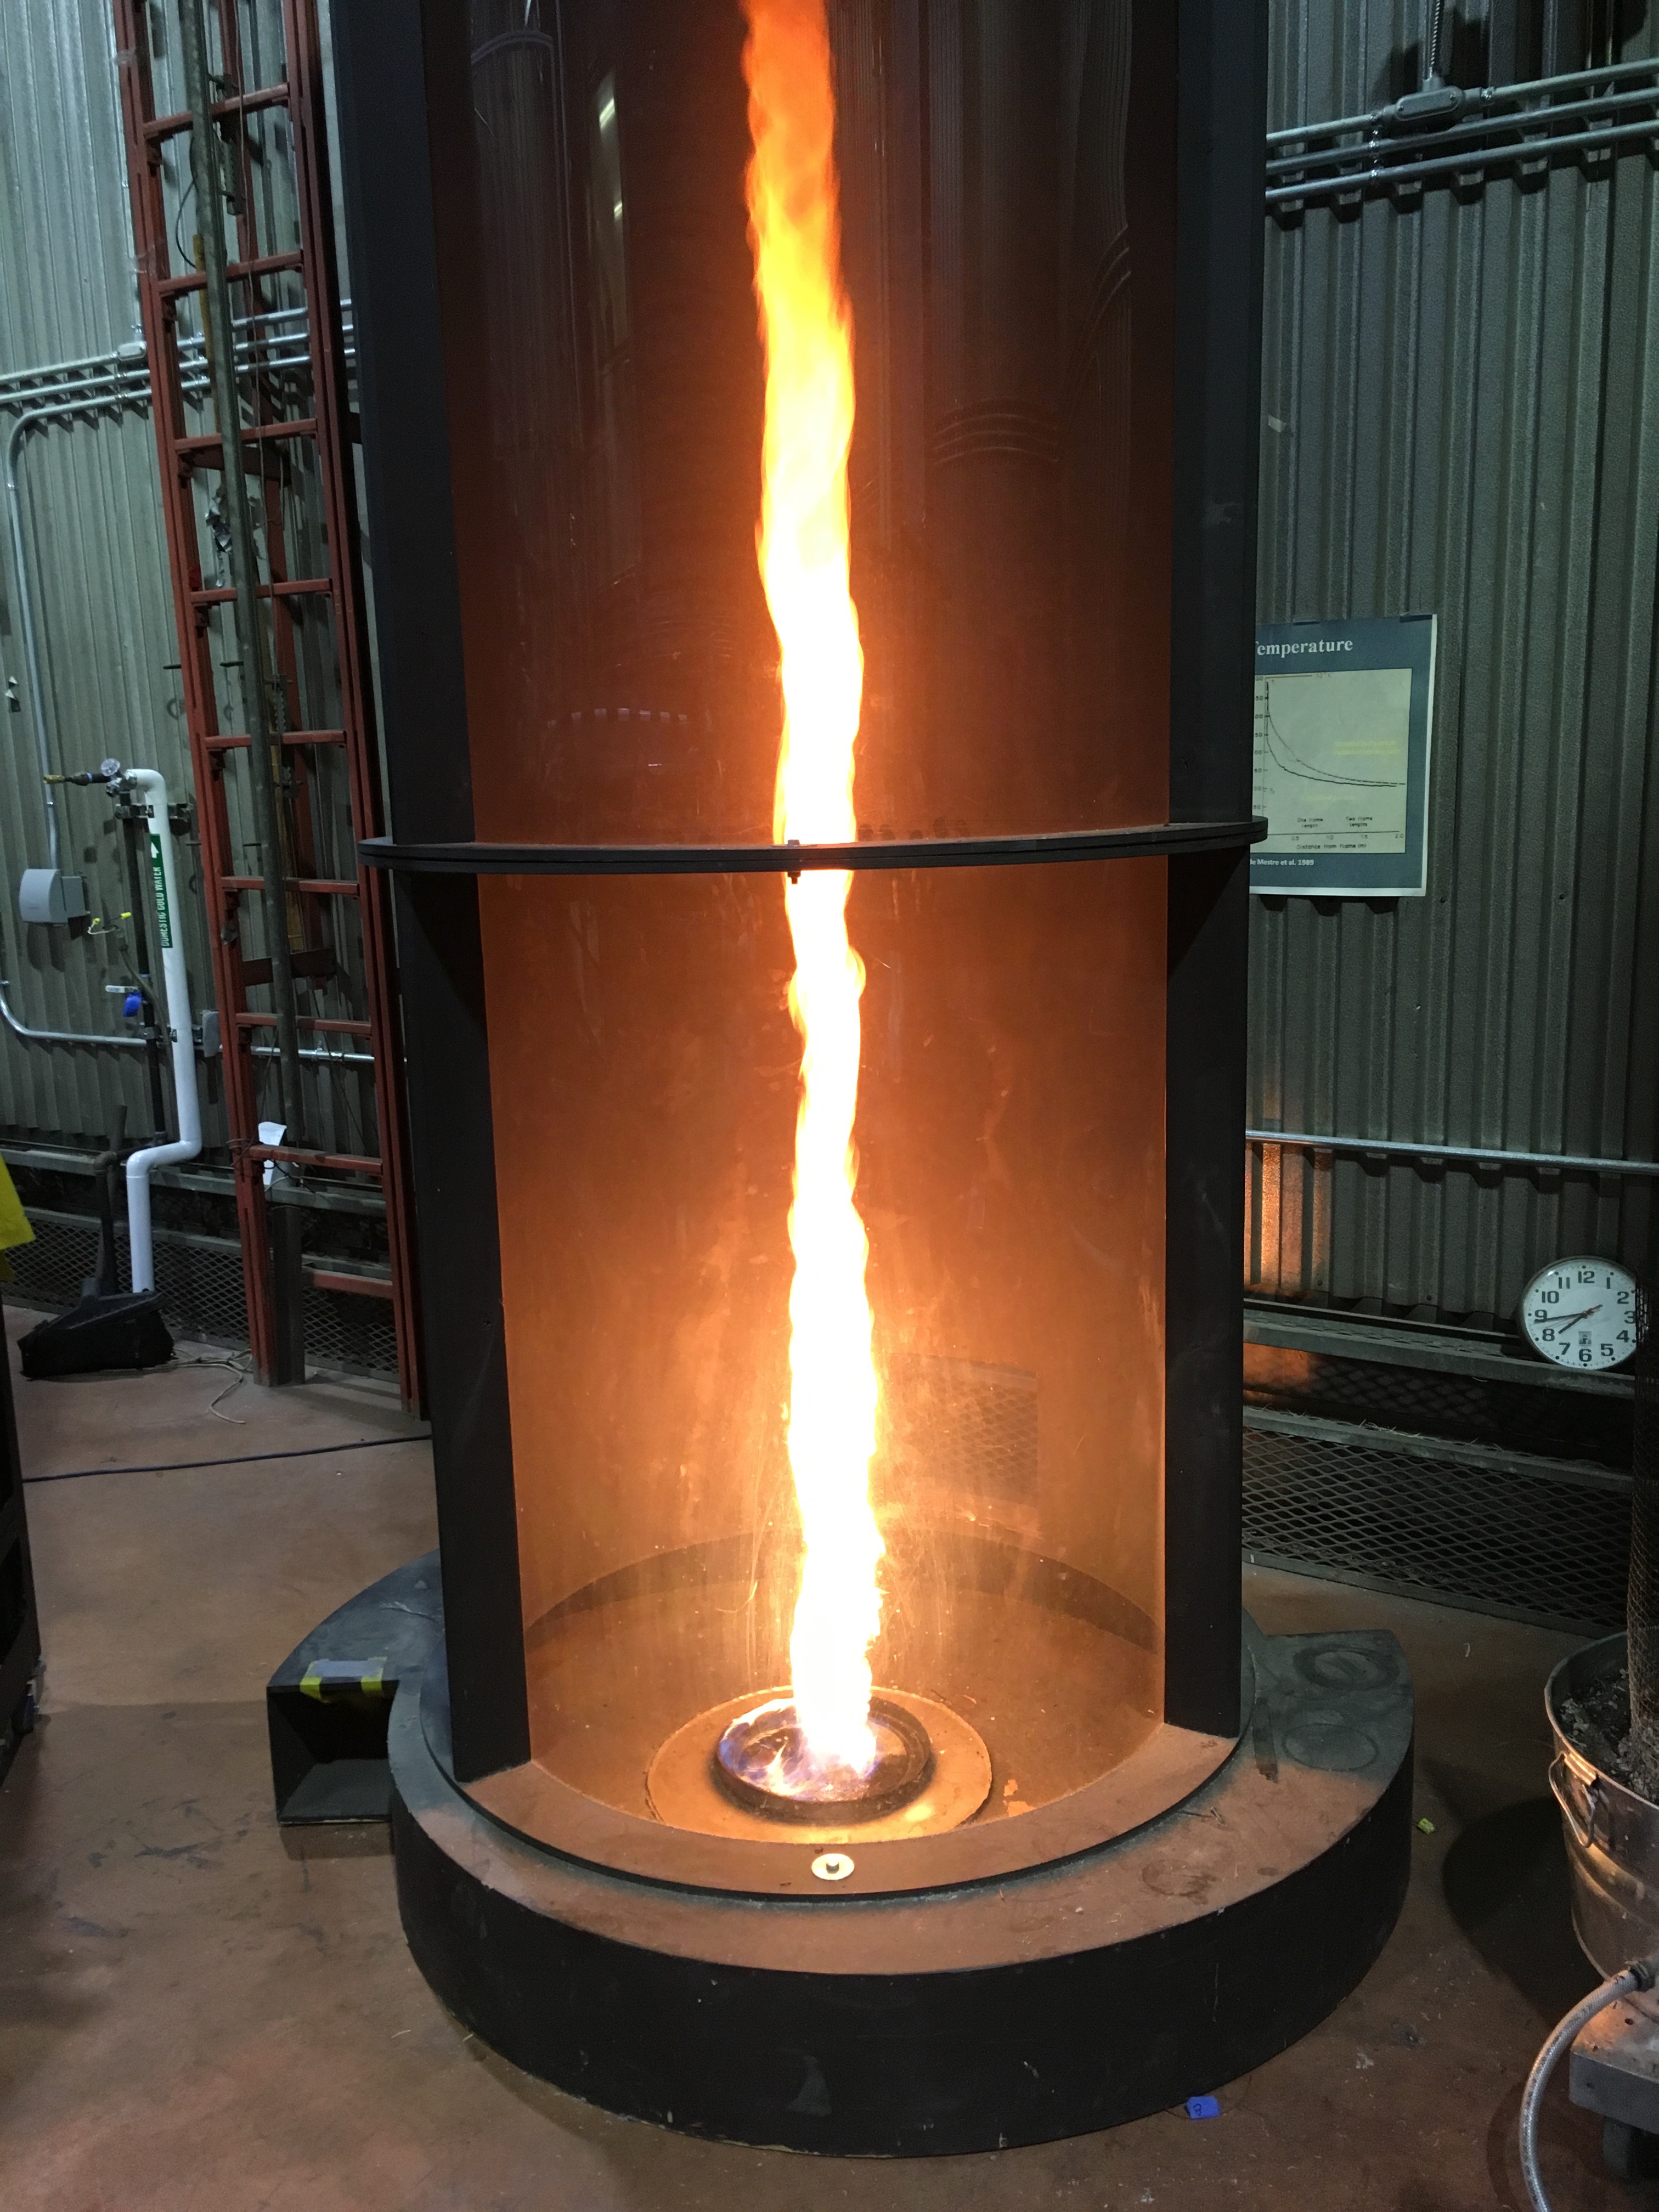 Fire Vortex at the USDA Fire Sciences Lab in Missoula